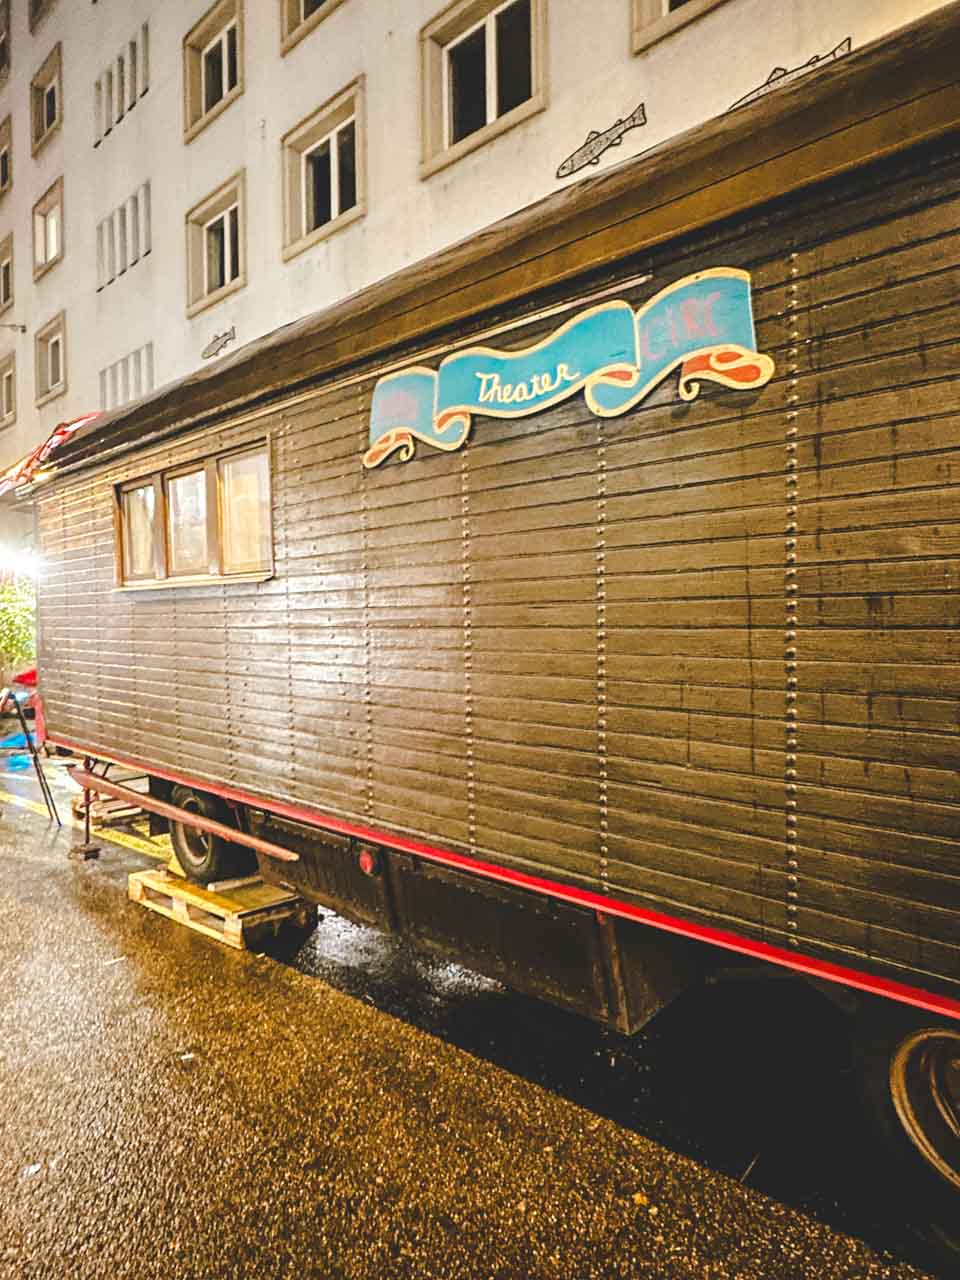 A vintage wooden trailer with 'Theater' sign, parked on the Rheingasse in Basel